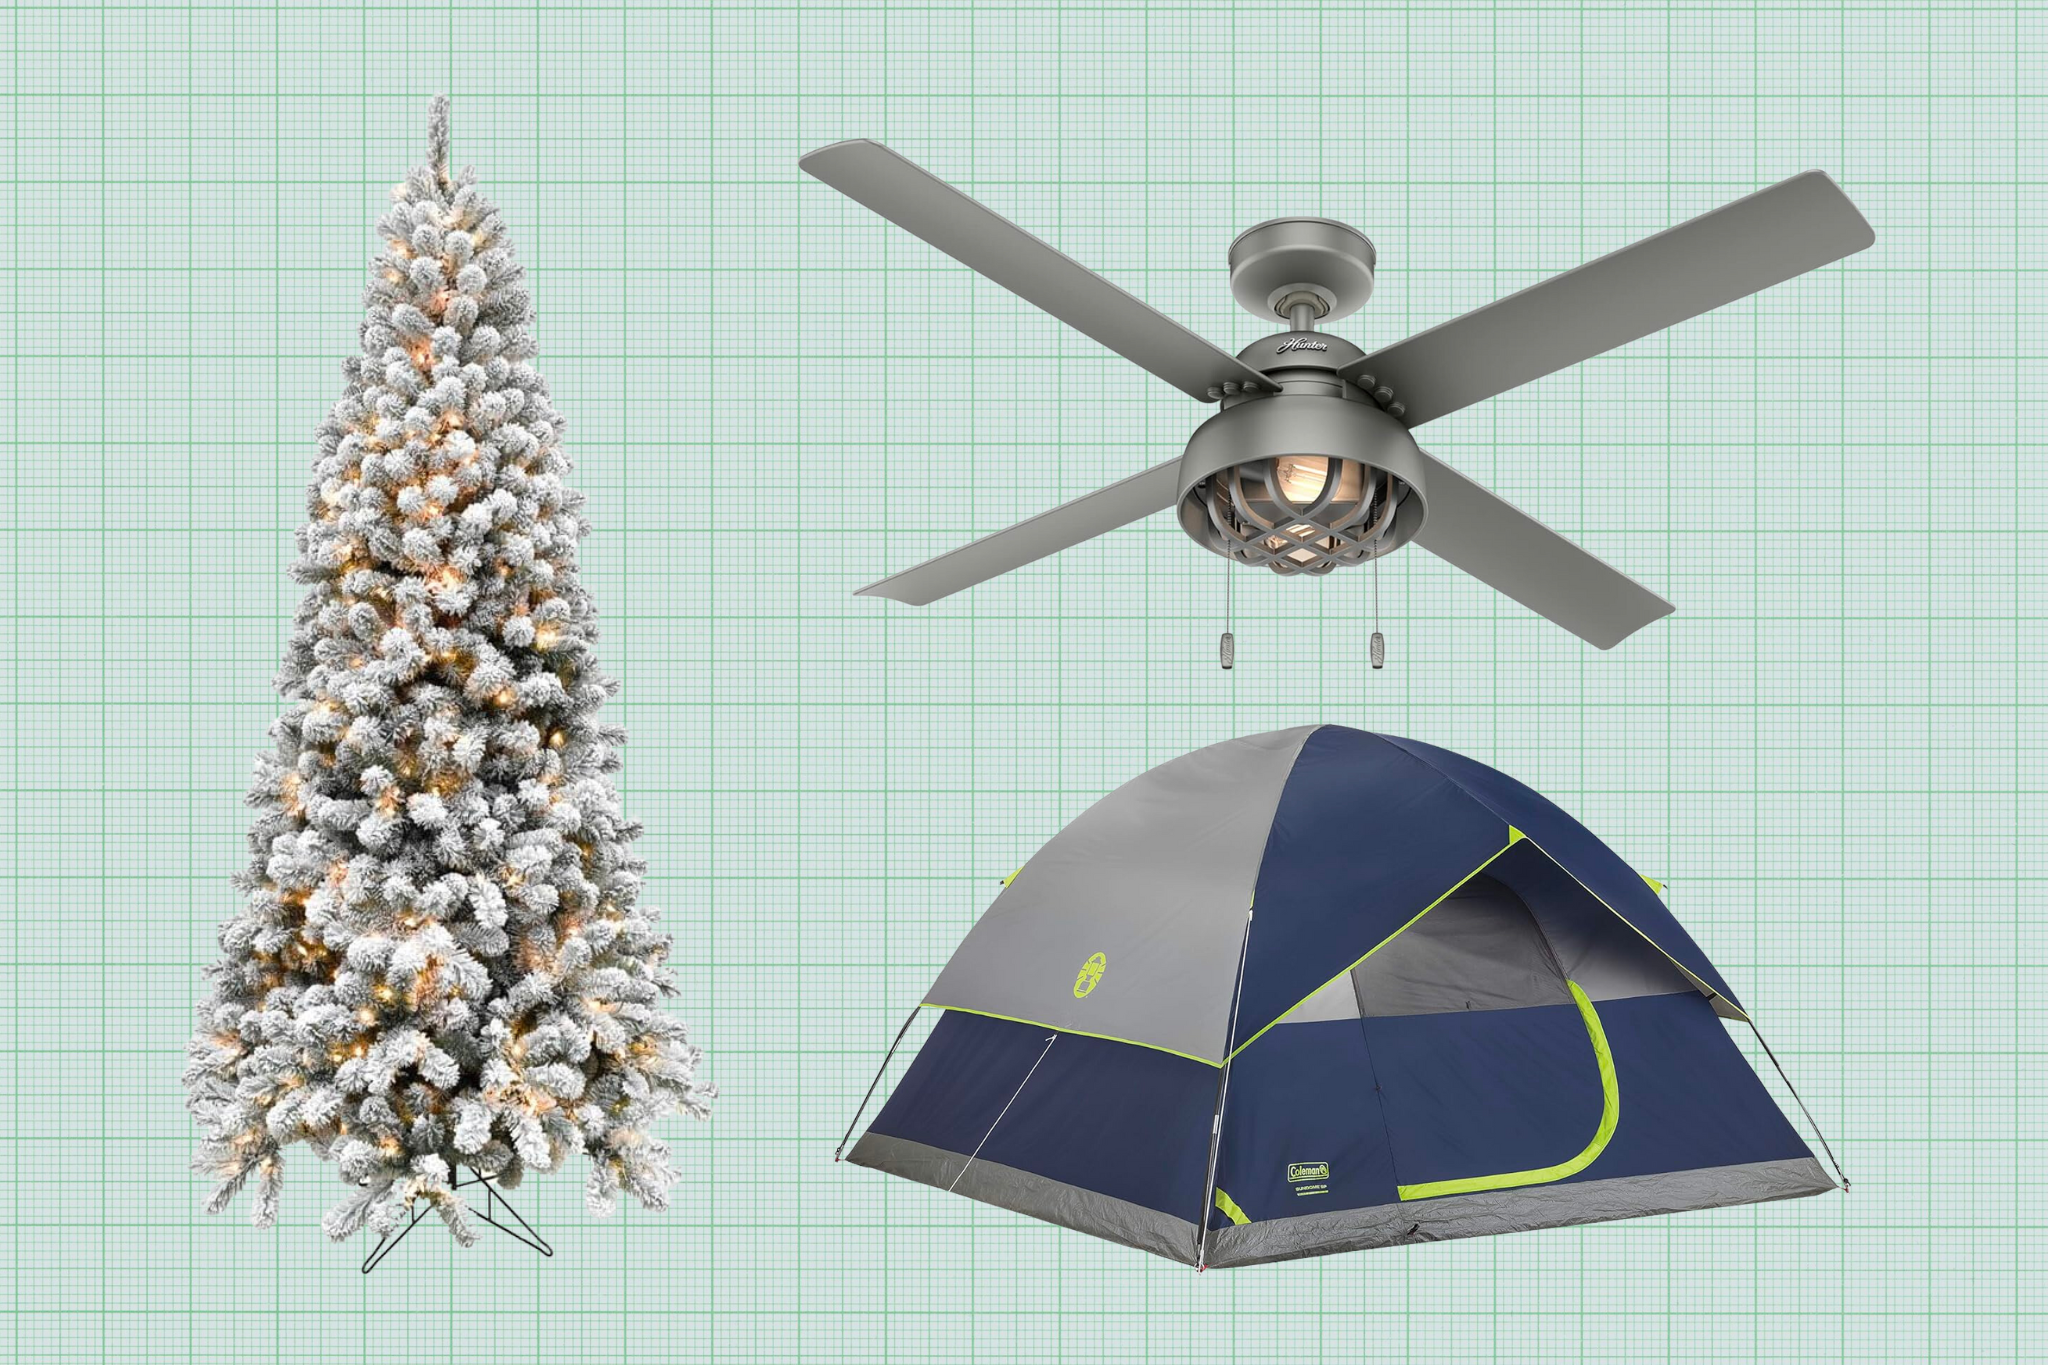 Fraser Hill Farm 7.5-Ft. Alaskan Pine Flocked Tree, Hunter 52-Inch Spring Mill Ceiling Fan, and Coleman Sundome Camping Tent isolated on a green grid paper background